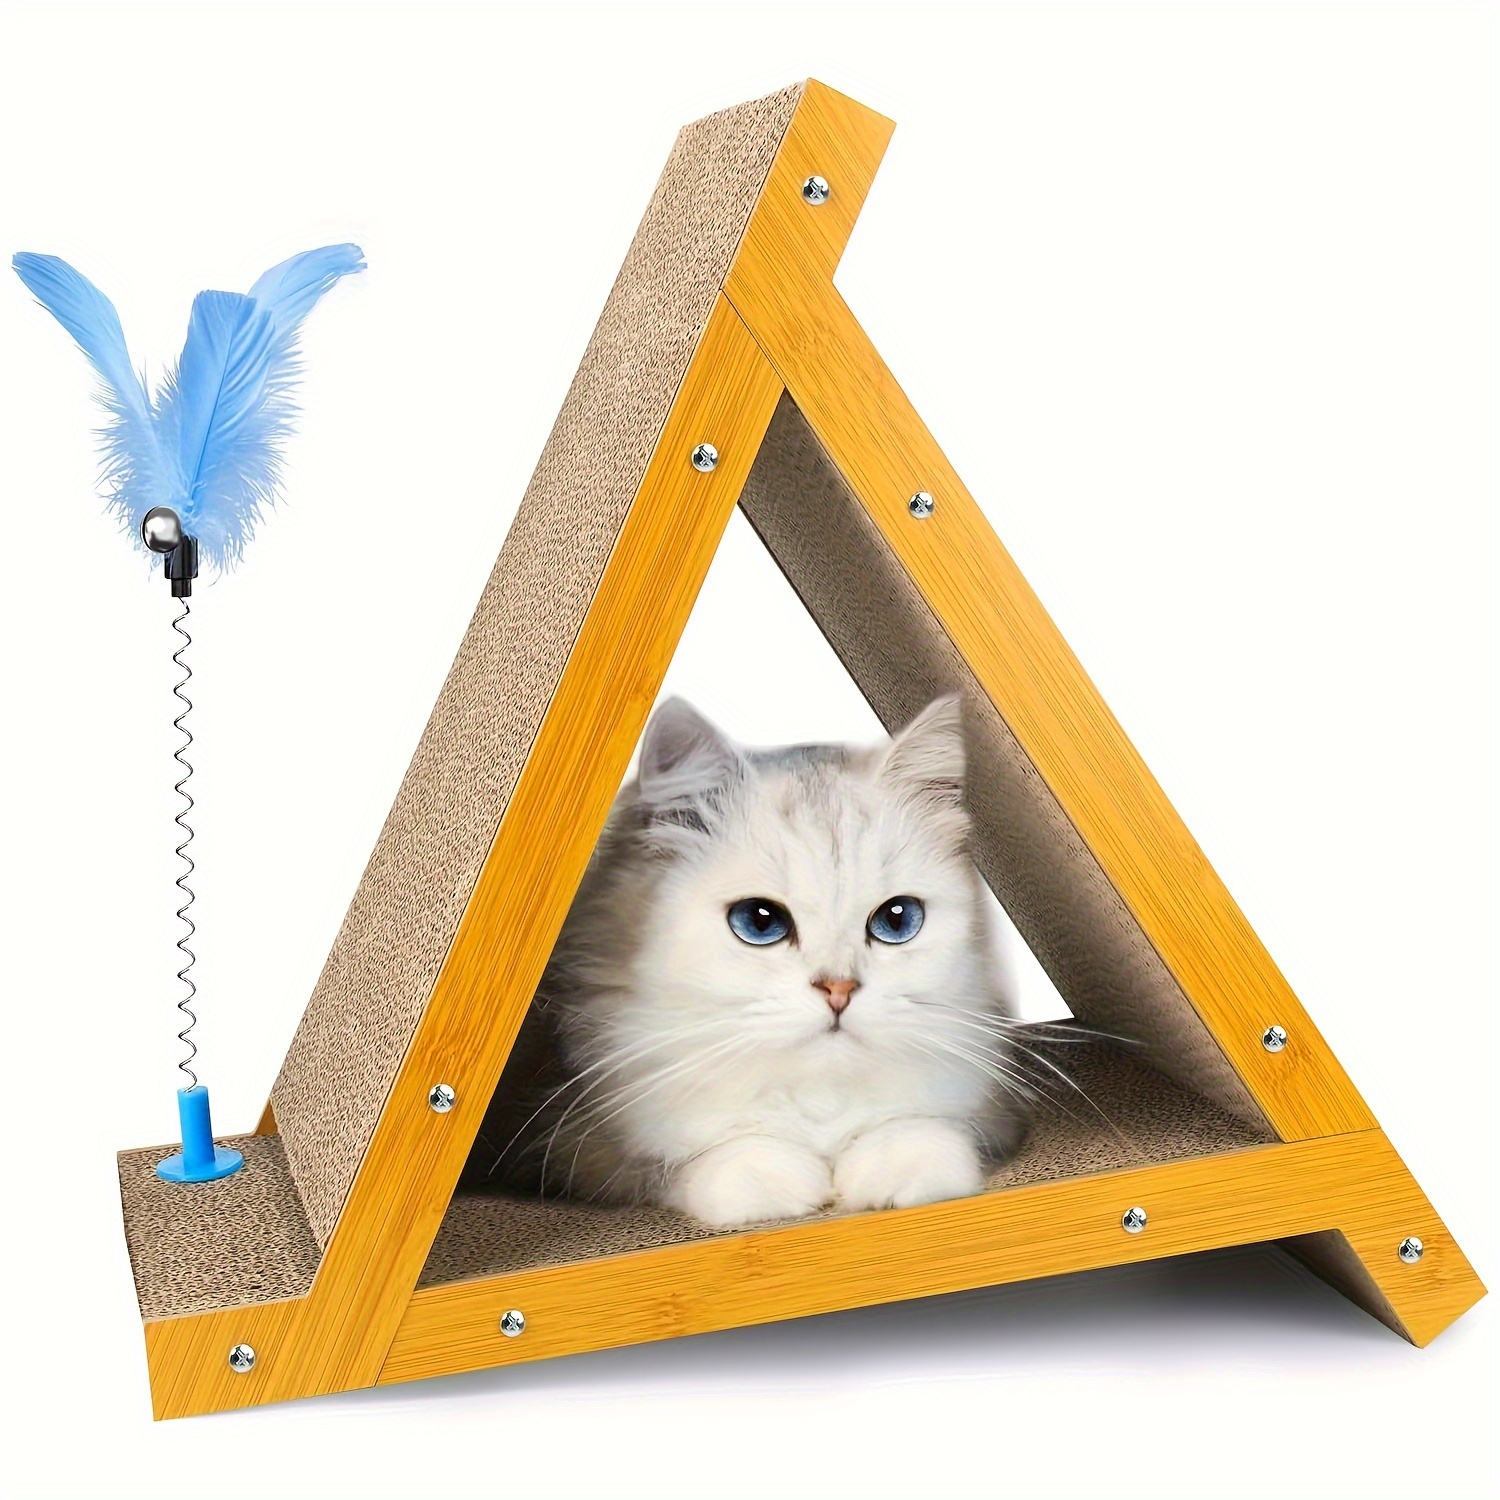 

Cat Scratcher, Cat Scratching Post, Triangle Cat Scratching Board, Sturdy Cat Toys For Indoor Cats, 6 Sides Available, Replaceable Cardboard, Durable Cat Scratch With Cat Wand & Catnip